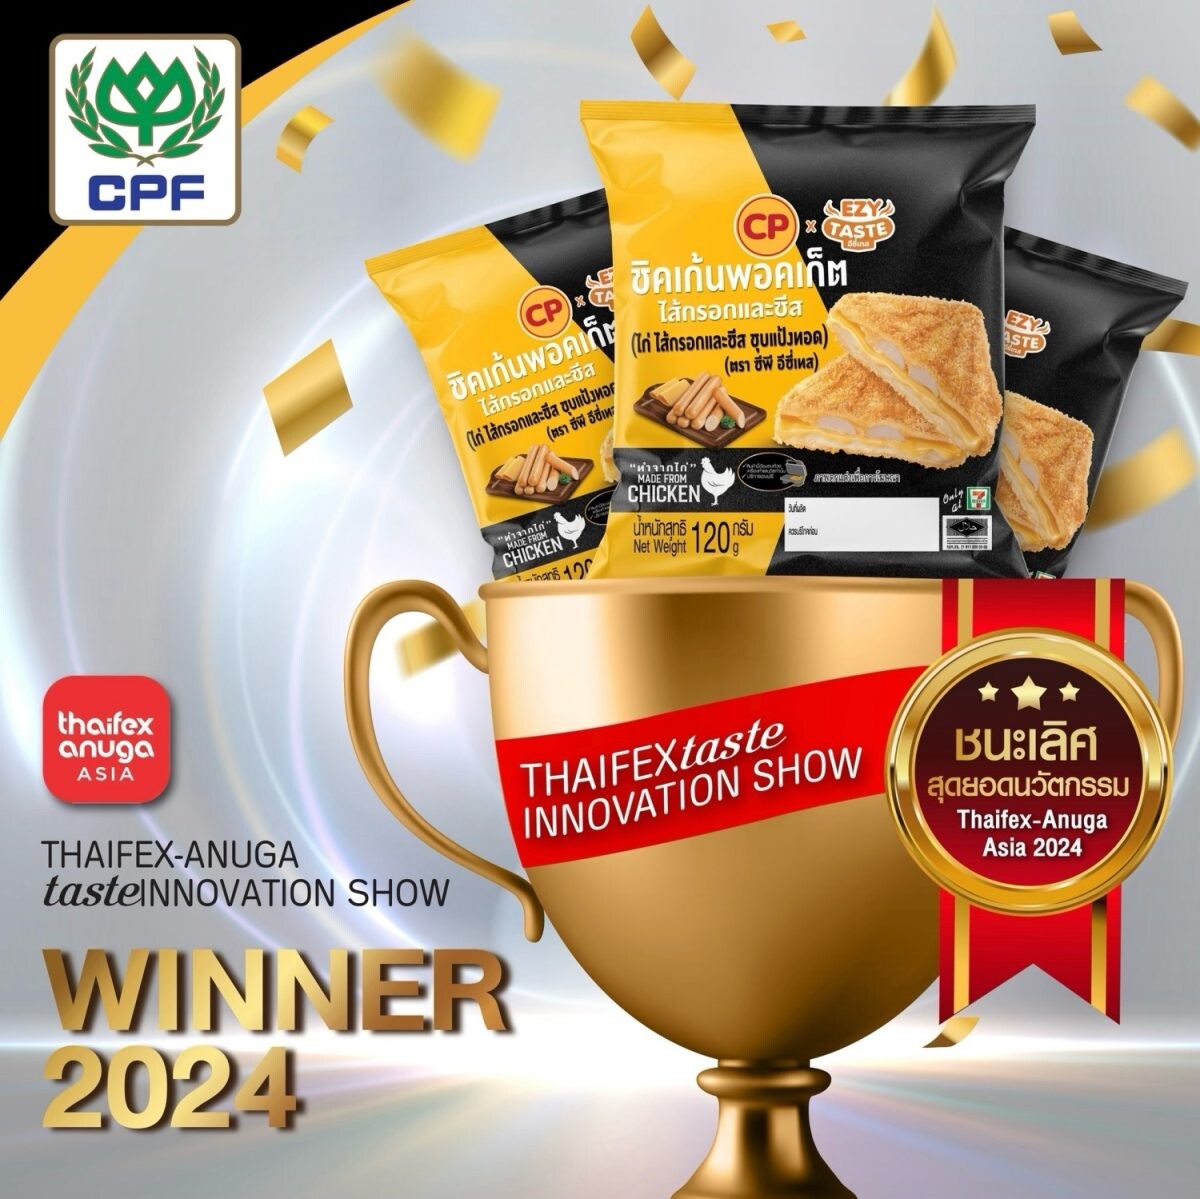 CP Foods Showcases "Kitchen of the World with Sustainovation" at THAIFEX - Anuga Asia 2024